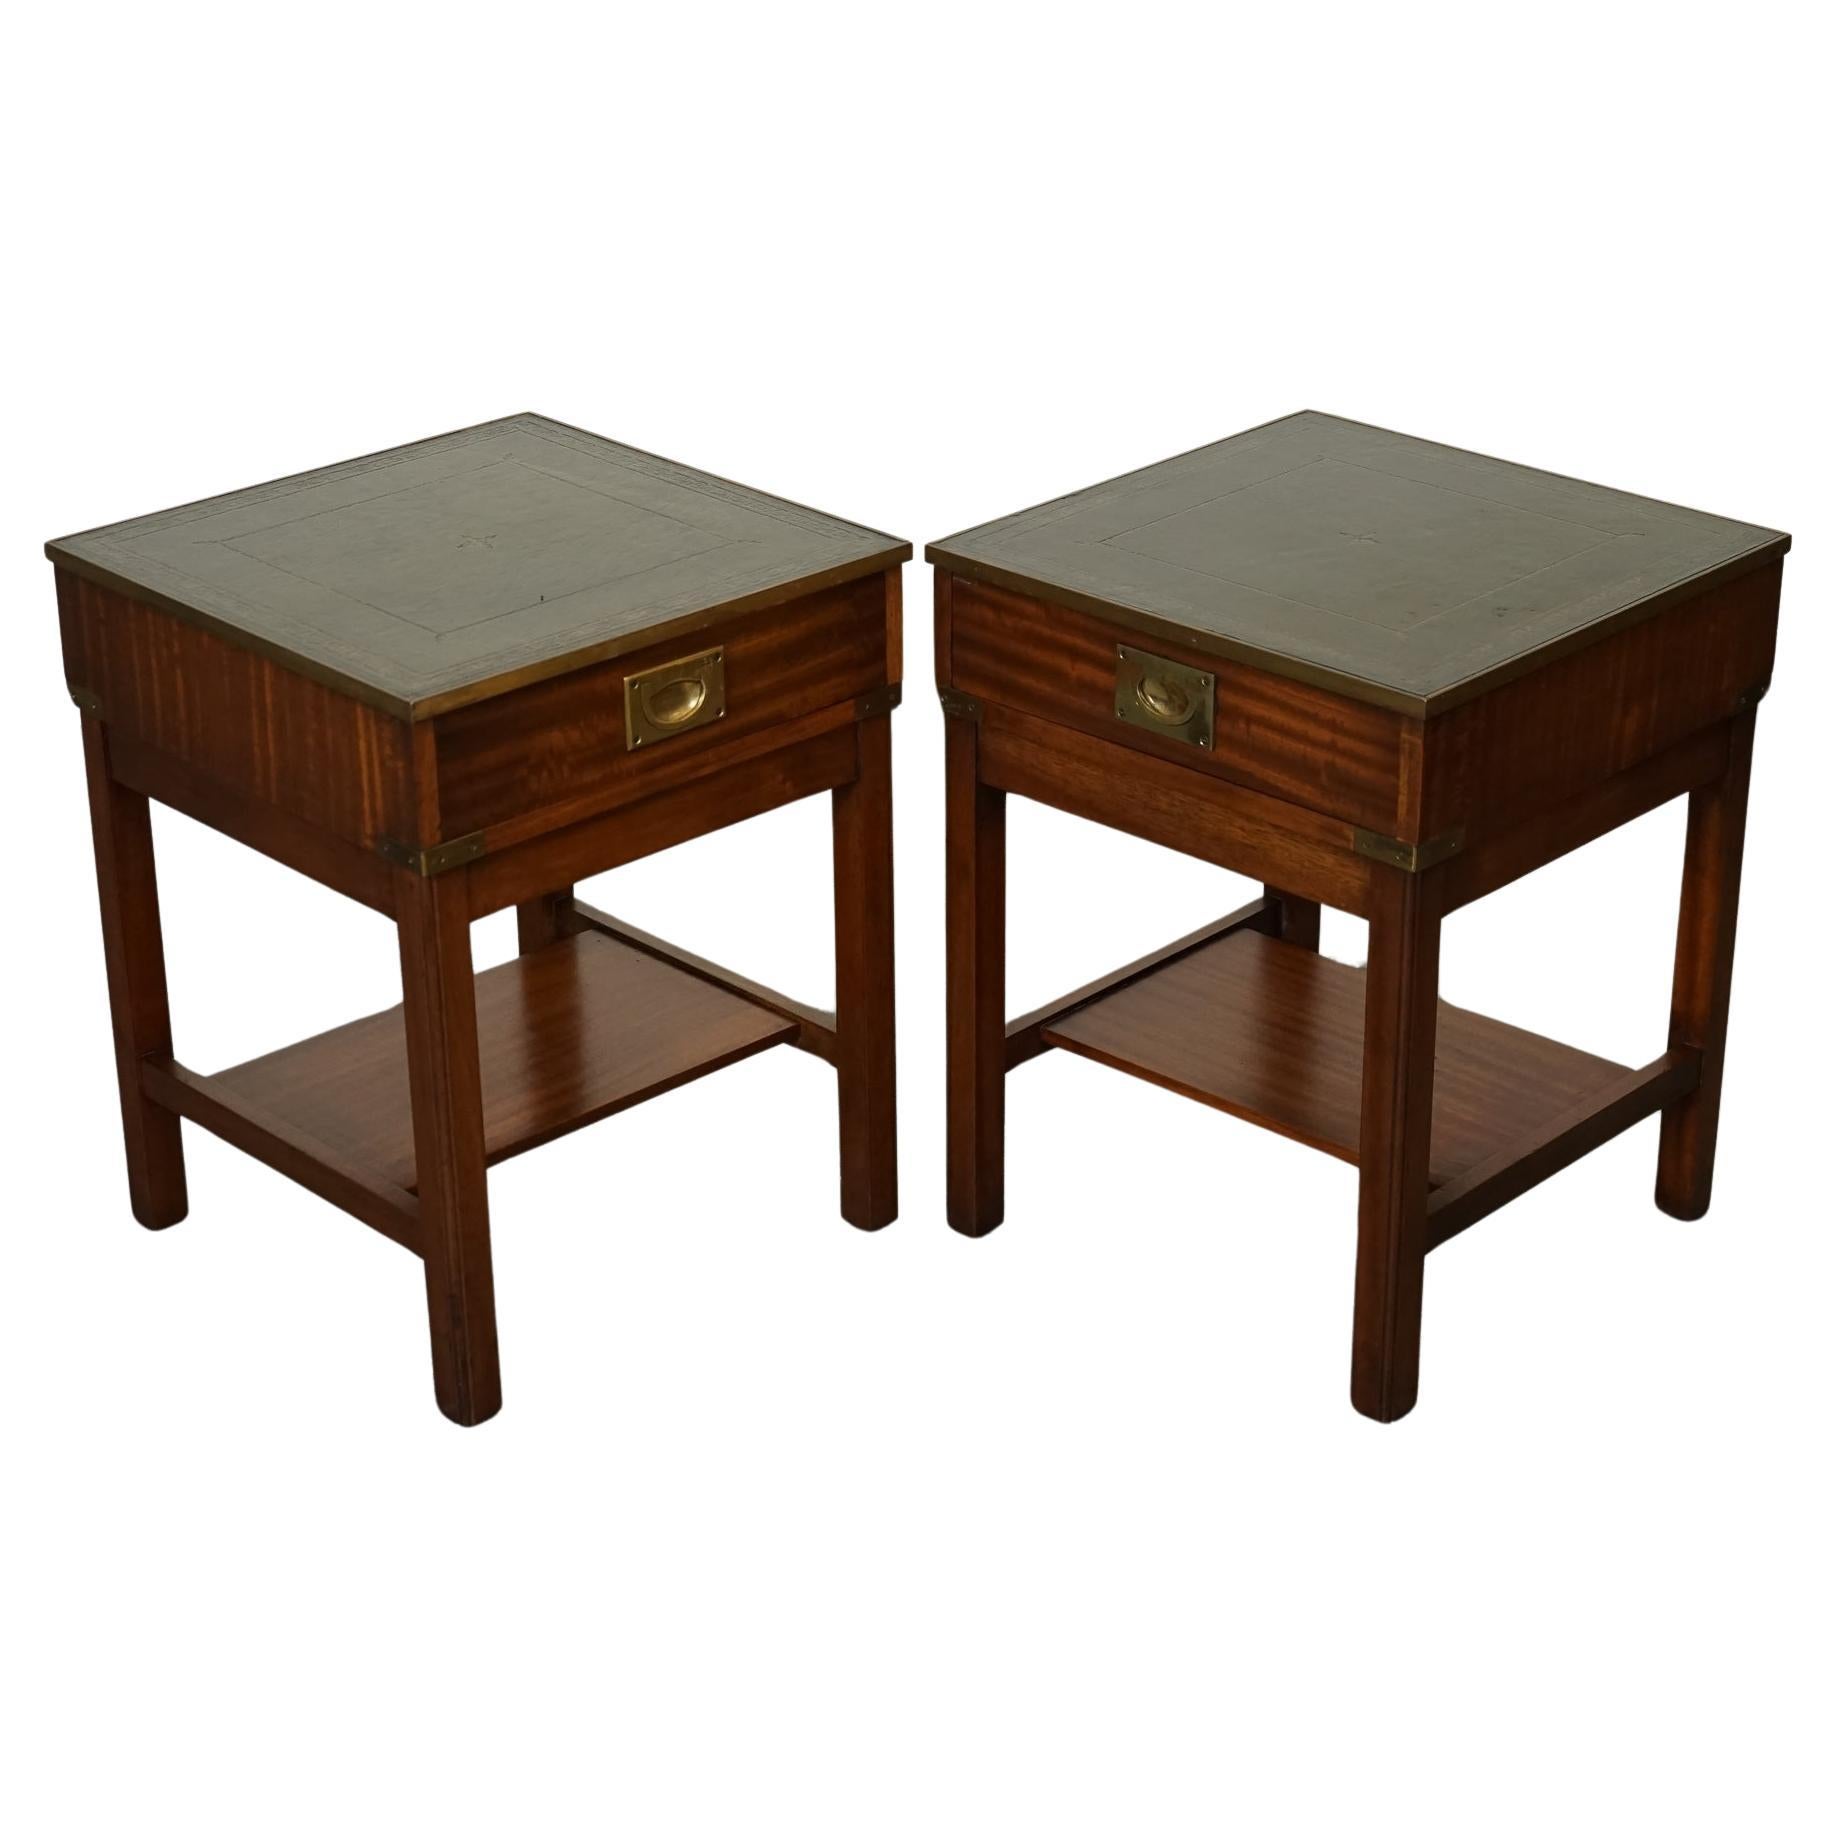 PAIR MILITARY CAMPAIGN BEDSIDE TABLES NIGHTSTANDS ANTiQUE GREEN LEATHER top J1 en vente